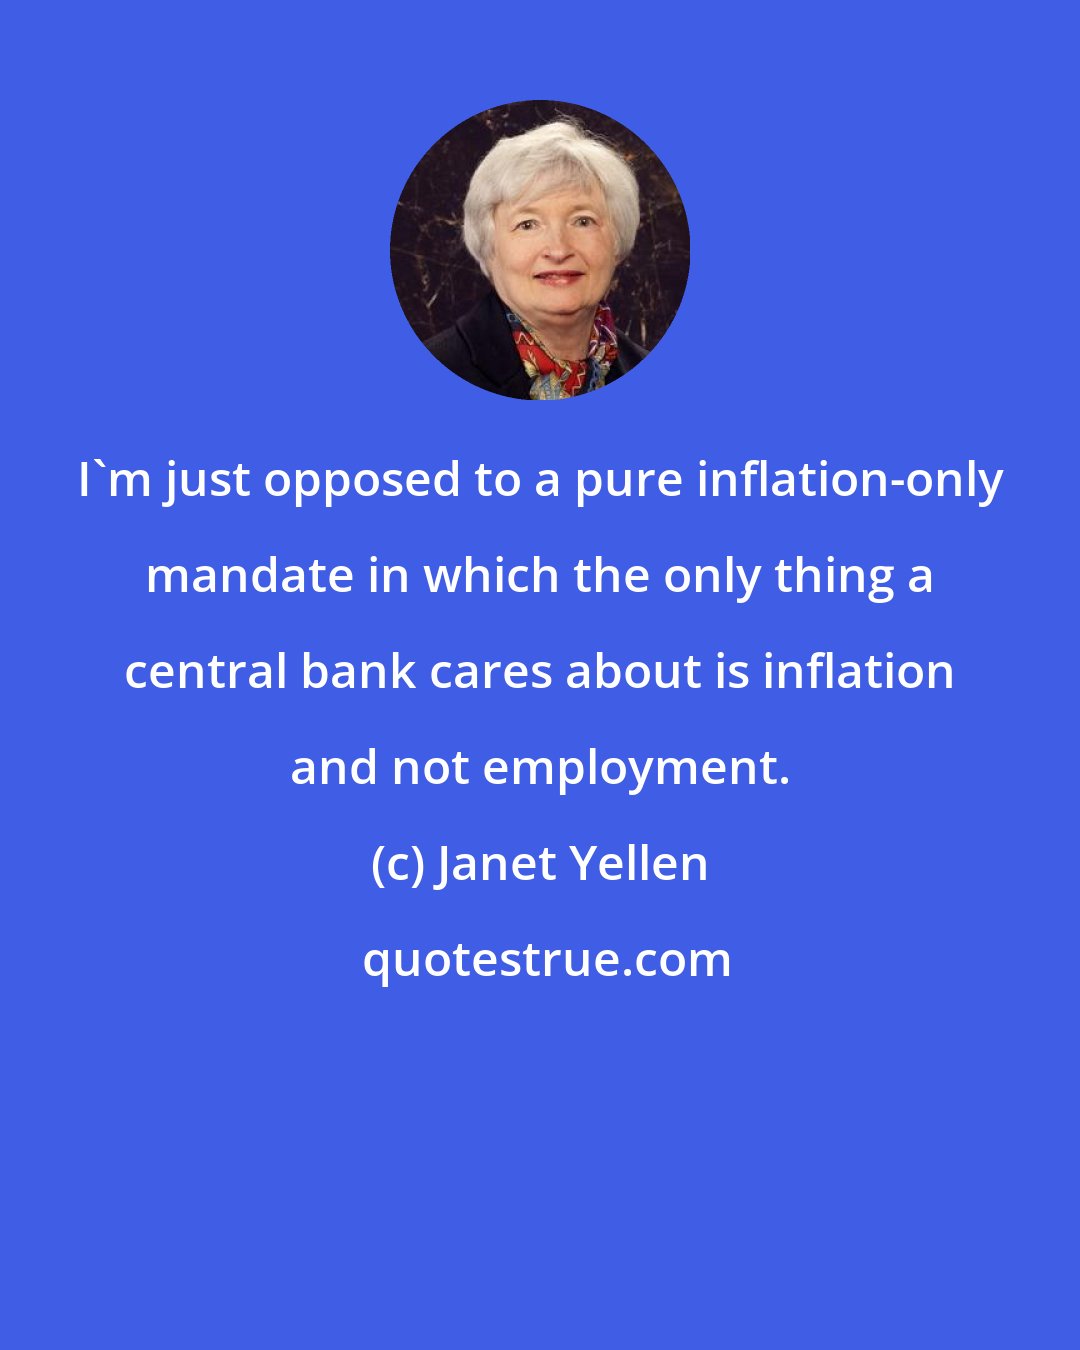 Janet Yellen: I'm just opposed to a pure inflation-only mandate in which the only thing a central bank cares about is inflation and not employment.